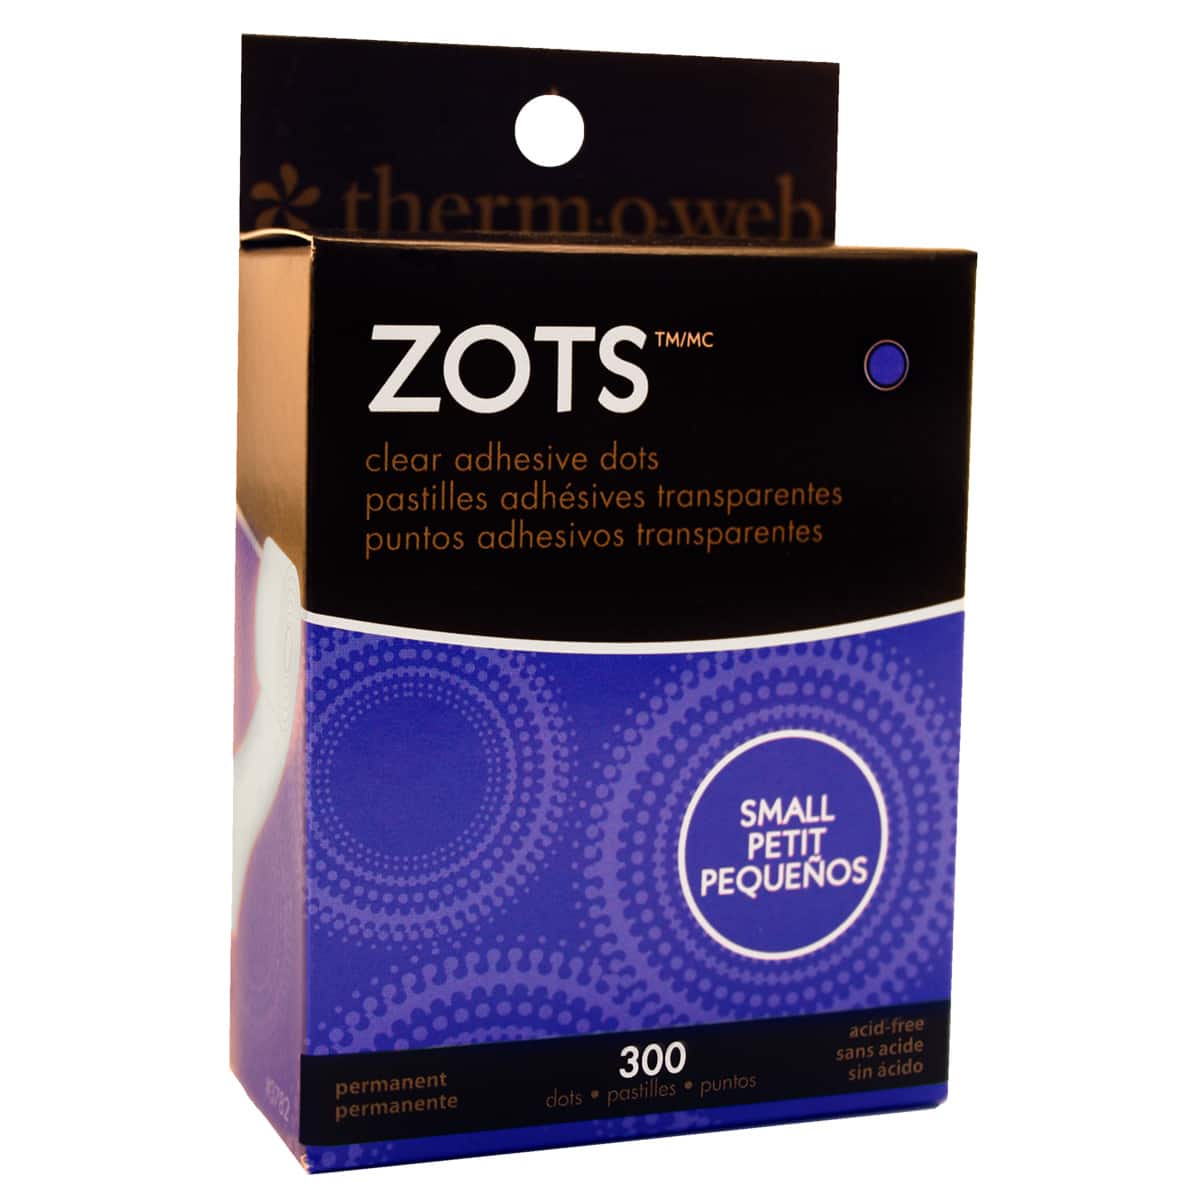 Zots Clear Adhesive Dots Craft 1/2x1/16 Thick 250/pkg